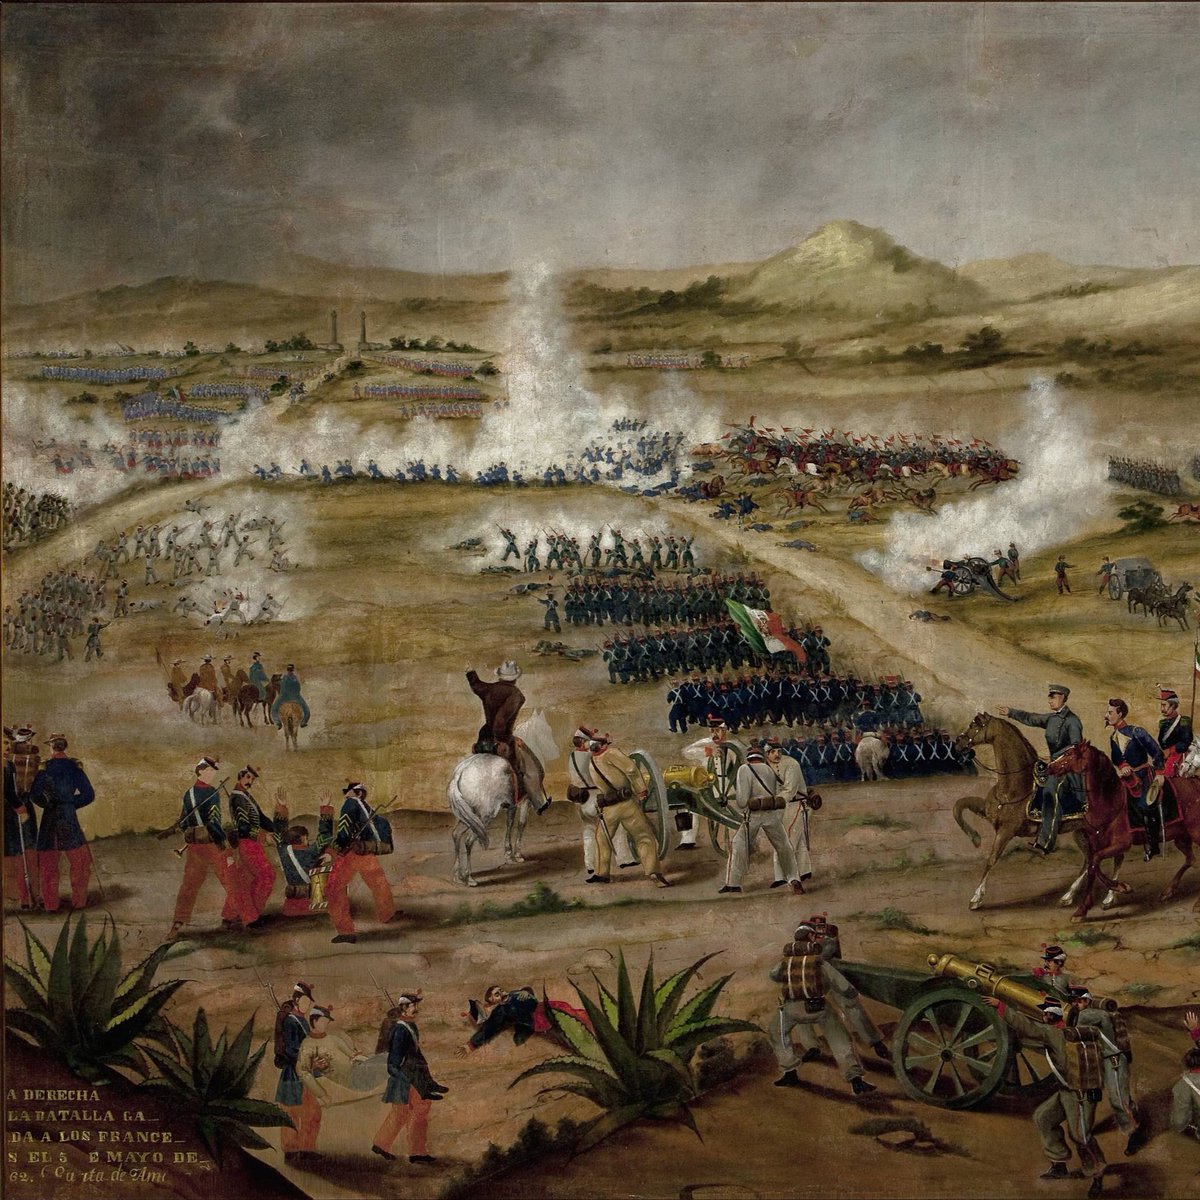 #OnThisDay in 1862, the Mexican Army defeated the French Empire in the Battle of Puebla. This day signifies the importance of grassroots campaigns and their impact on politics and culture around the world. #CincoDeMayo 🇲🇽 #StrongerTogether